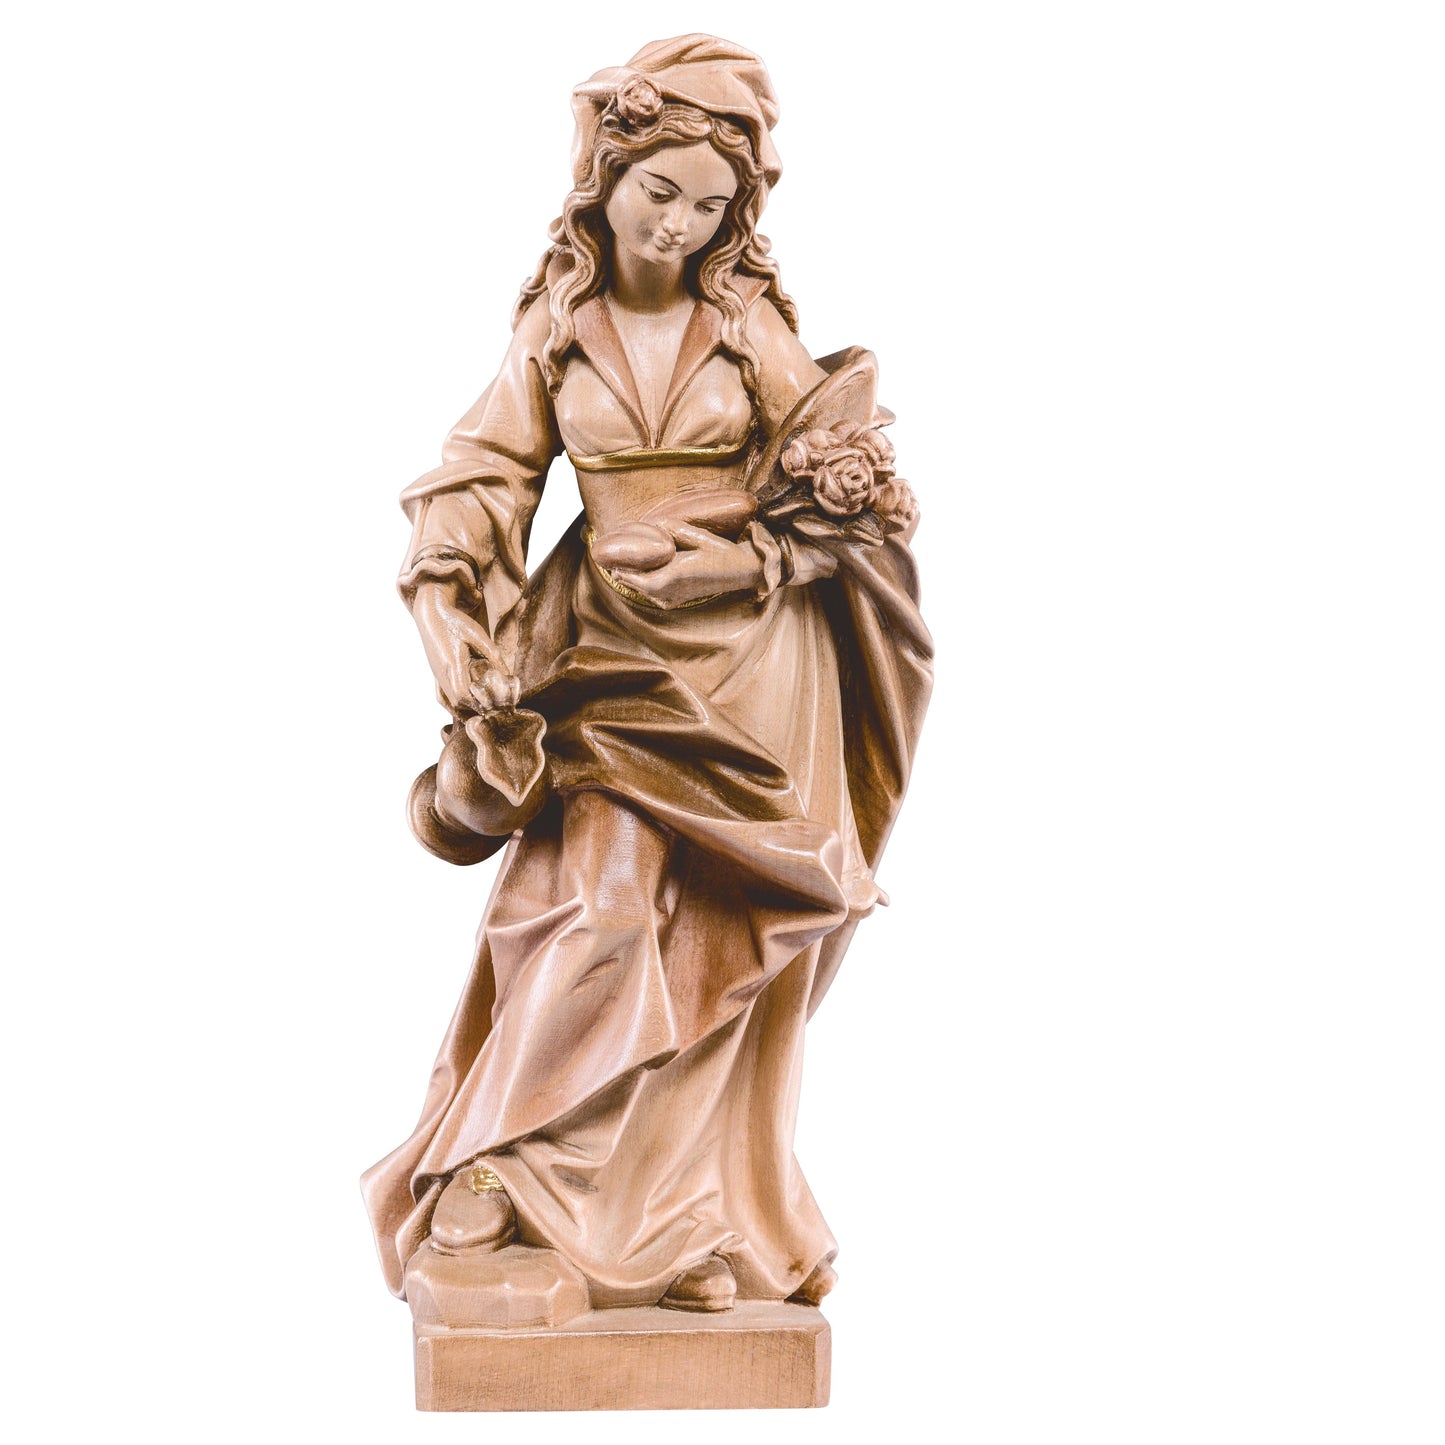 Mondo Cattolico Glossy / 15 cm (5.9 in) Wooden statue of St. Elizabeth with roses